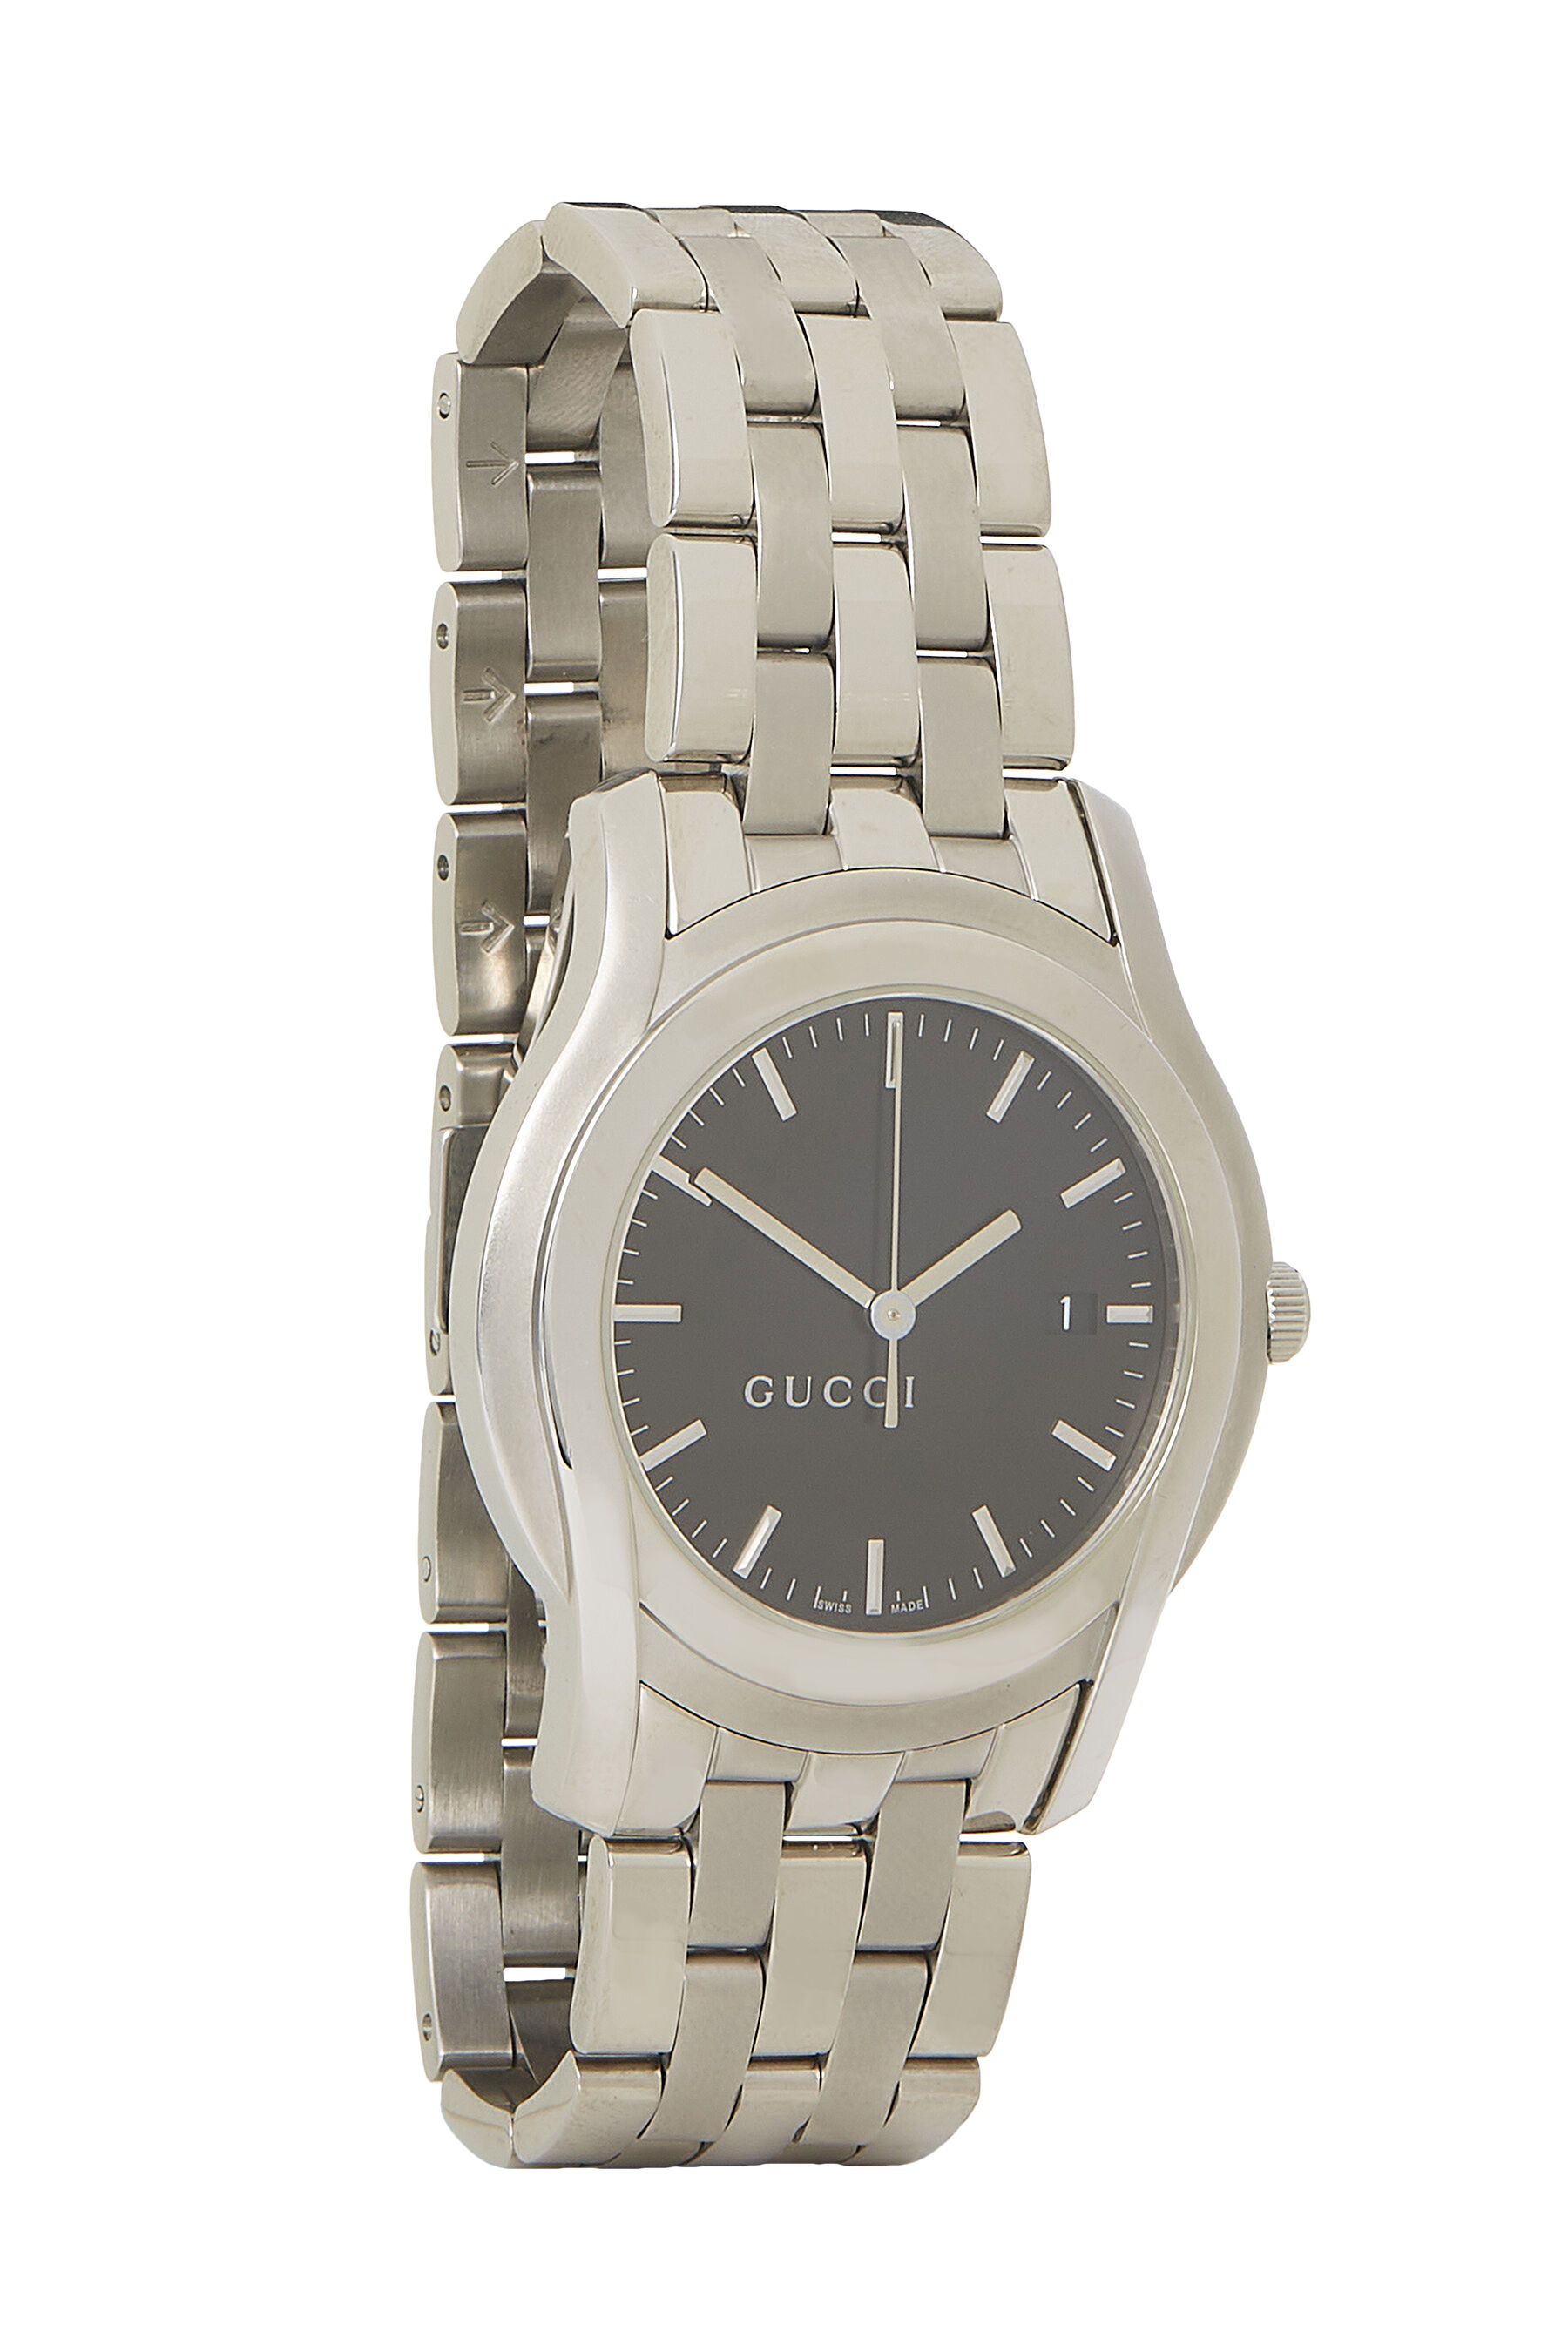 Gucci Black & Stainless Steel 5500 Automatic Watch XL